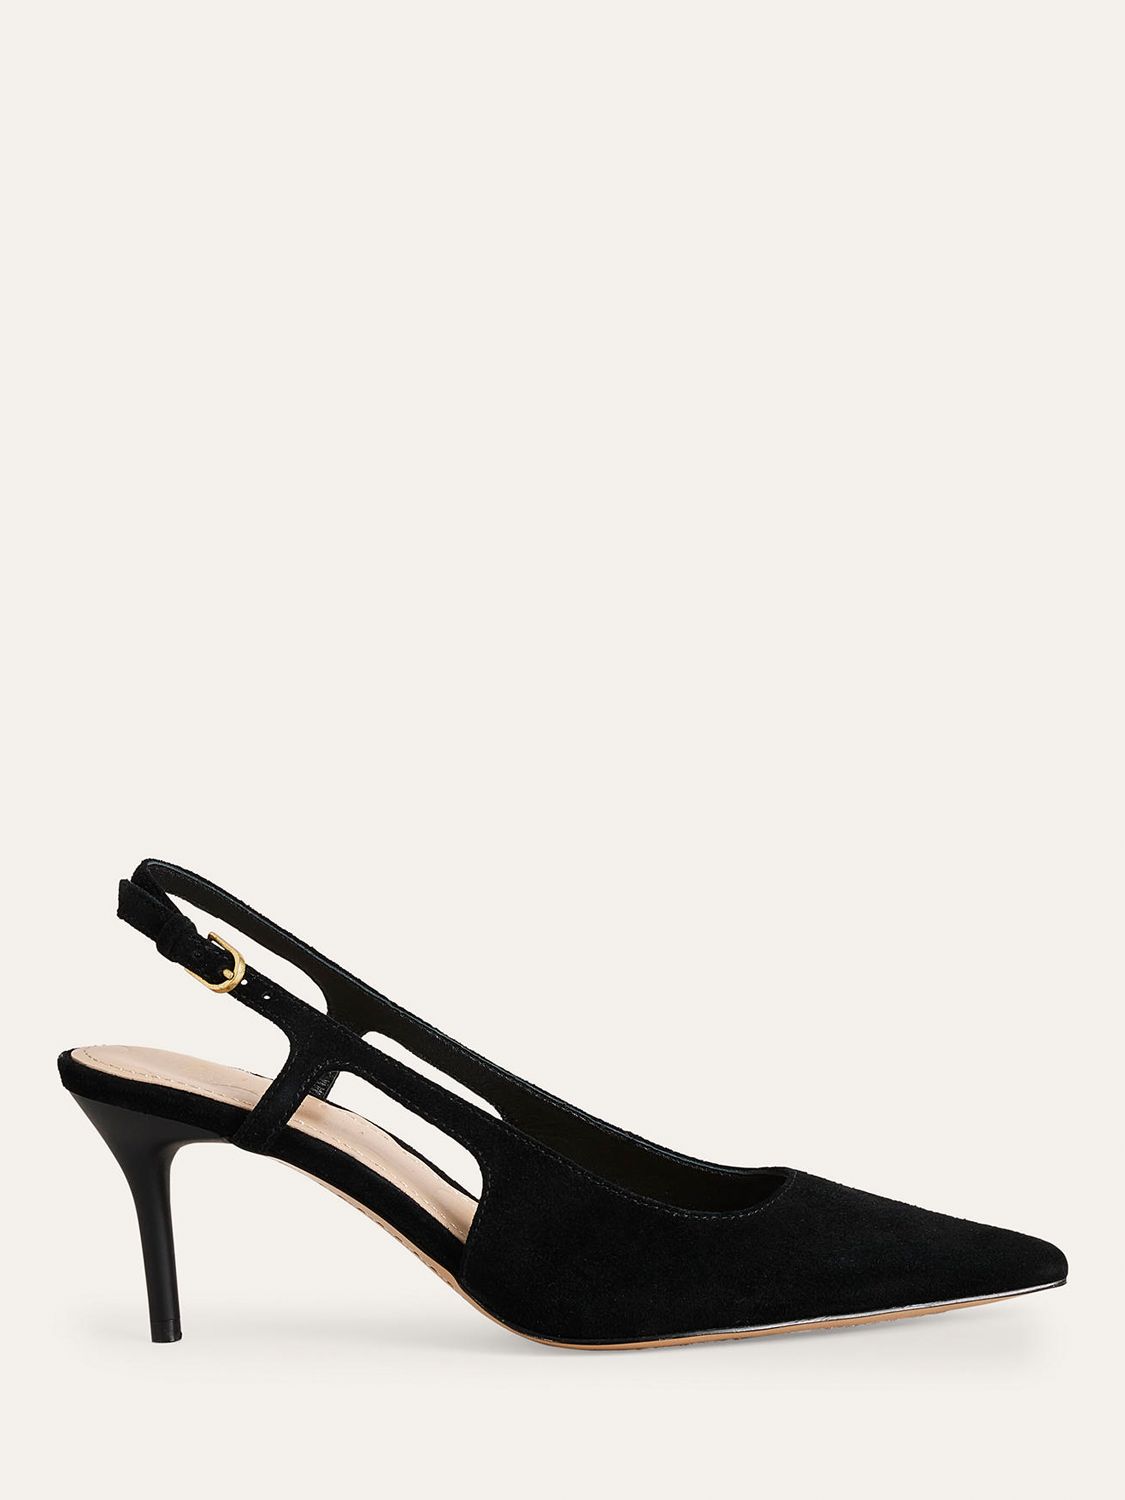 Boden Cut-out Sling Back Casual Shoes, Black Kid Suede at John Lewis ...